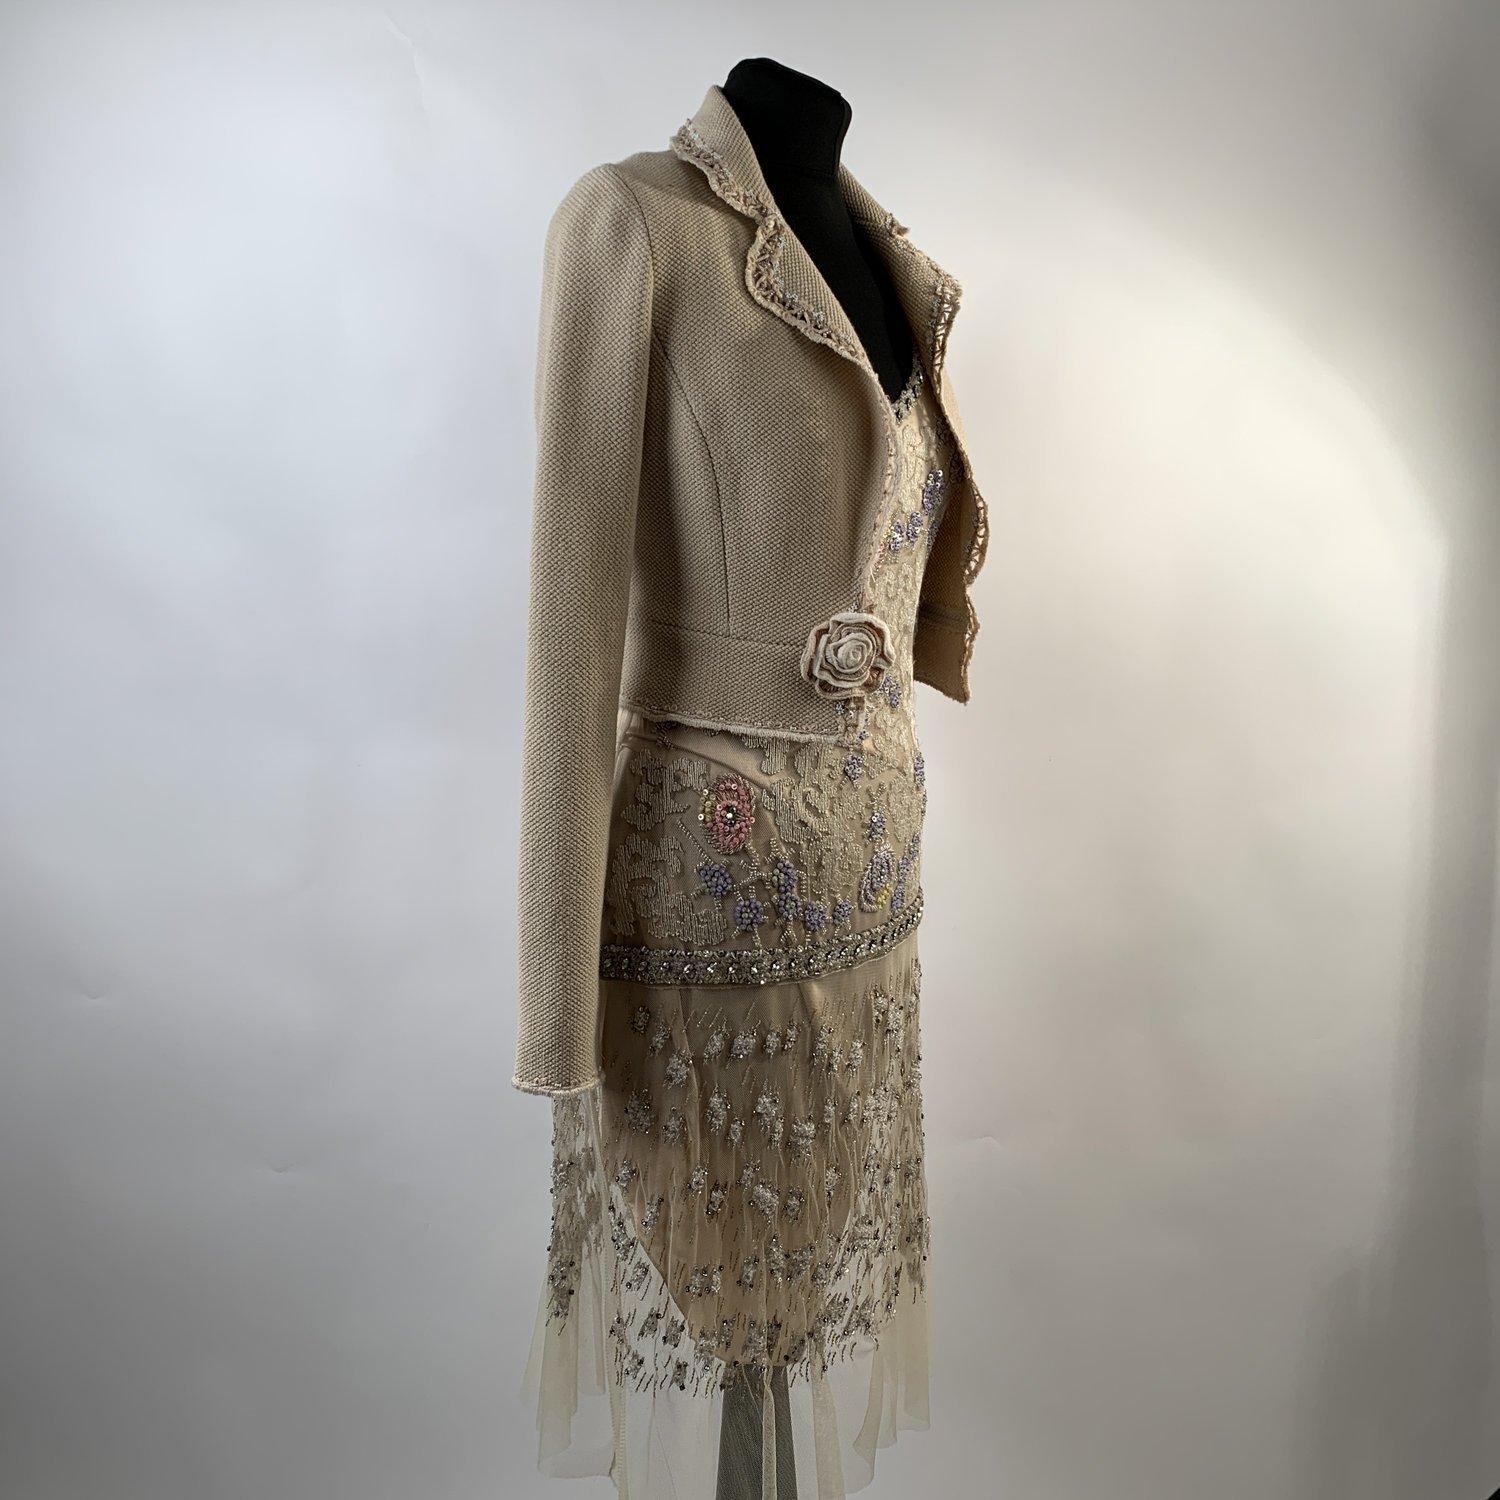 MATERIAL: Mesh, Silky Faabric COLOR: Beige MODEL: Dress set GENDER: Women SIZE: Extra-Small Condition A :EXCELLENT CONDITION - Used once or twice. Looks mint. Imperceptible signs of wear may be present due to storage - a couple of snags due to